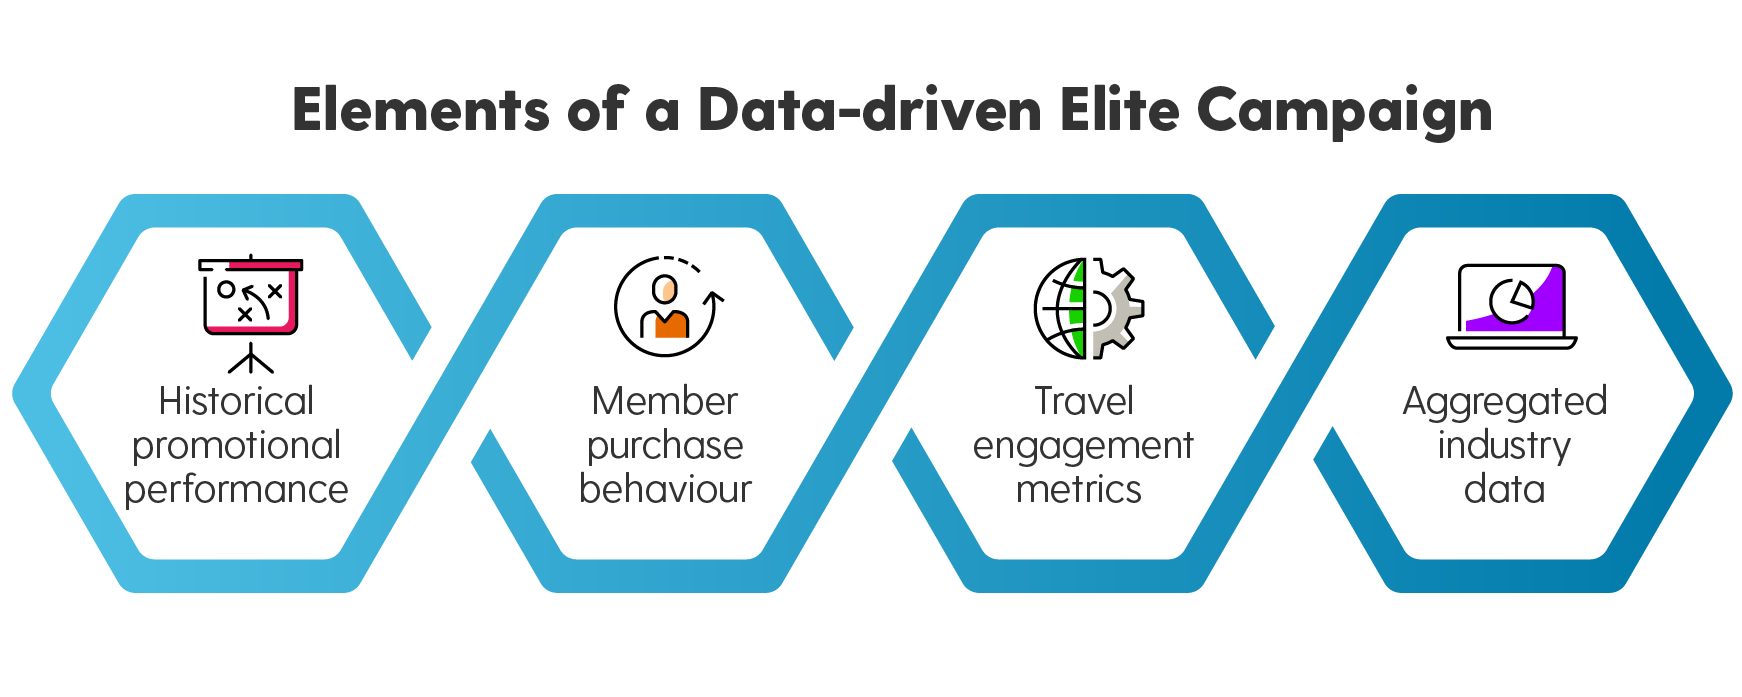 Elements of a data-driven Elite campaign. Historical promotional performance, member purchase behaviour, travel engagement metrics, and aggregated industry data.